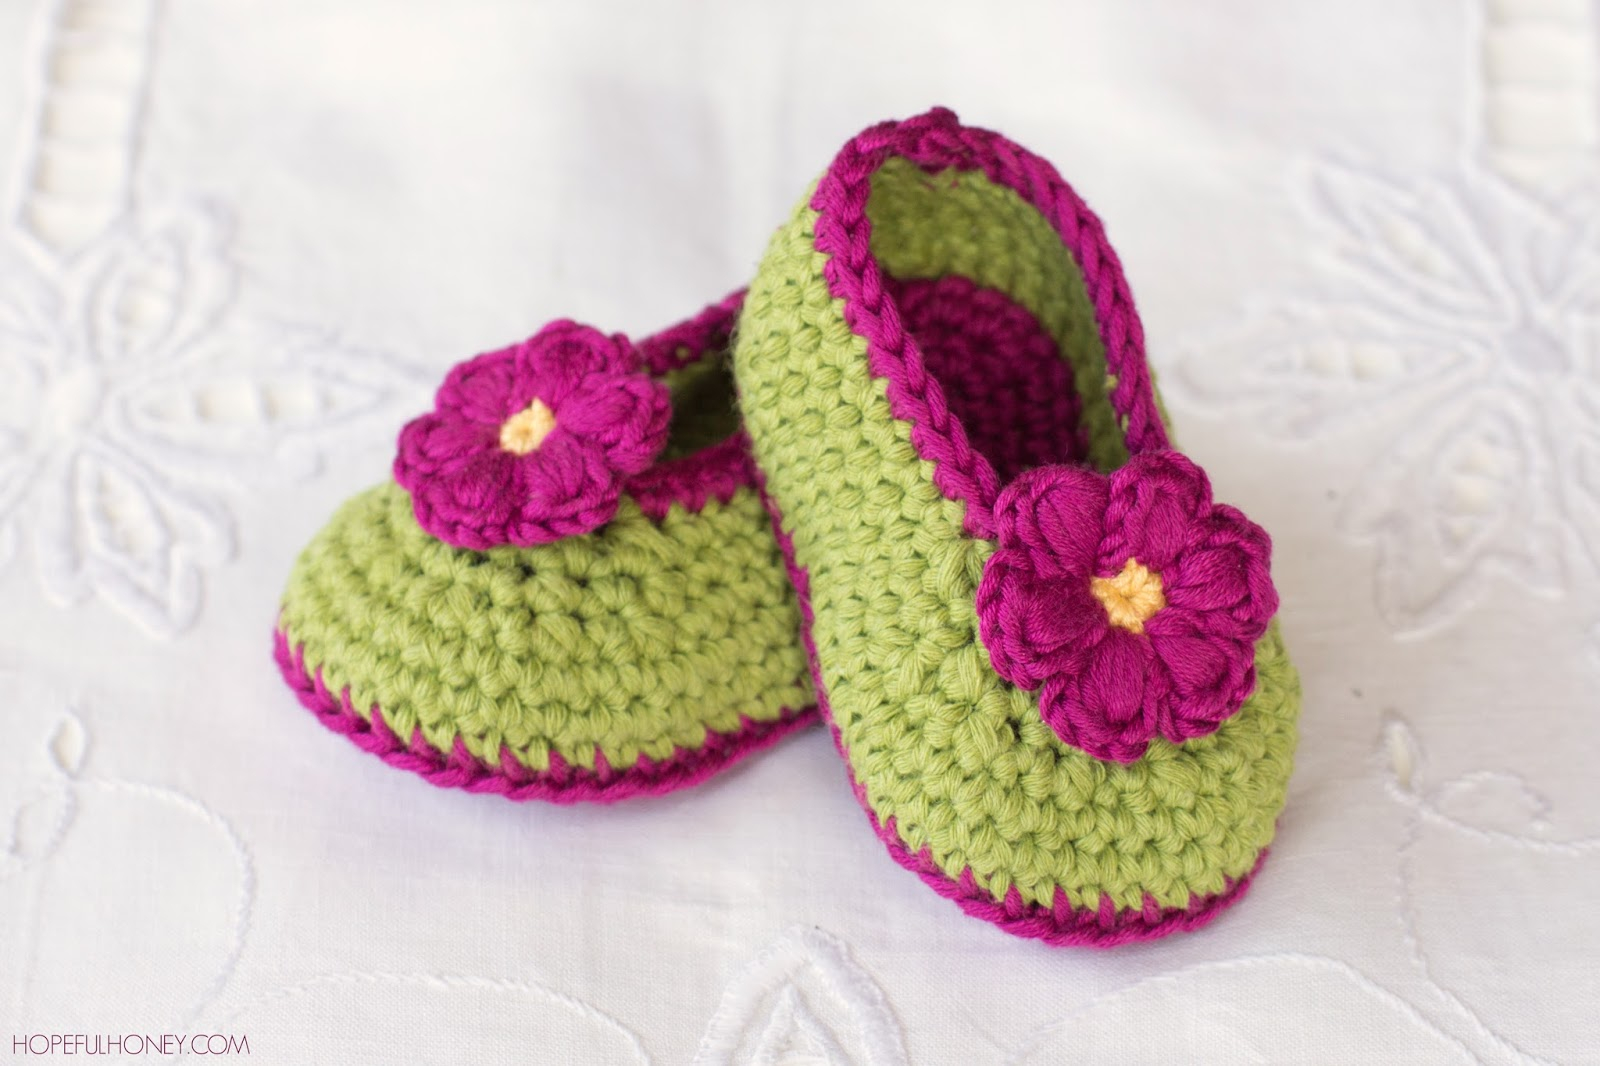 Knitted Baby Shoes Patterns Free Easy To Make Crochet Booties Crochet And Knitting Patterns 2019